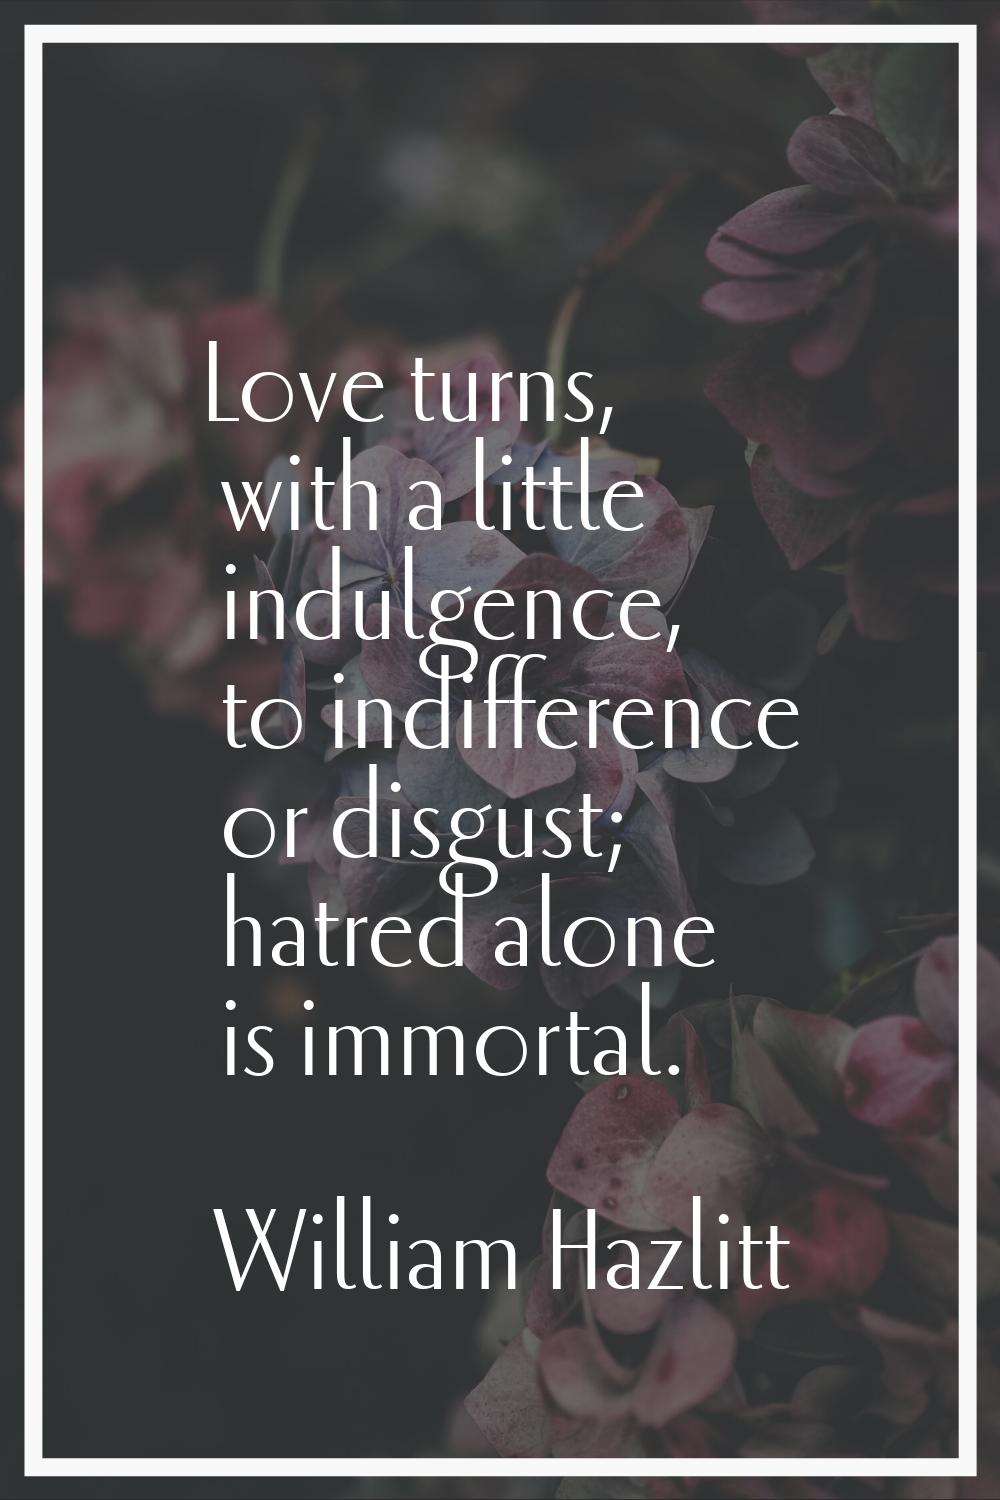 Love turns, with a little indulgence, to indifference or disgust; hatred alone is immortal.